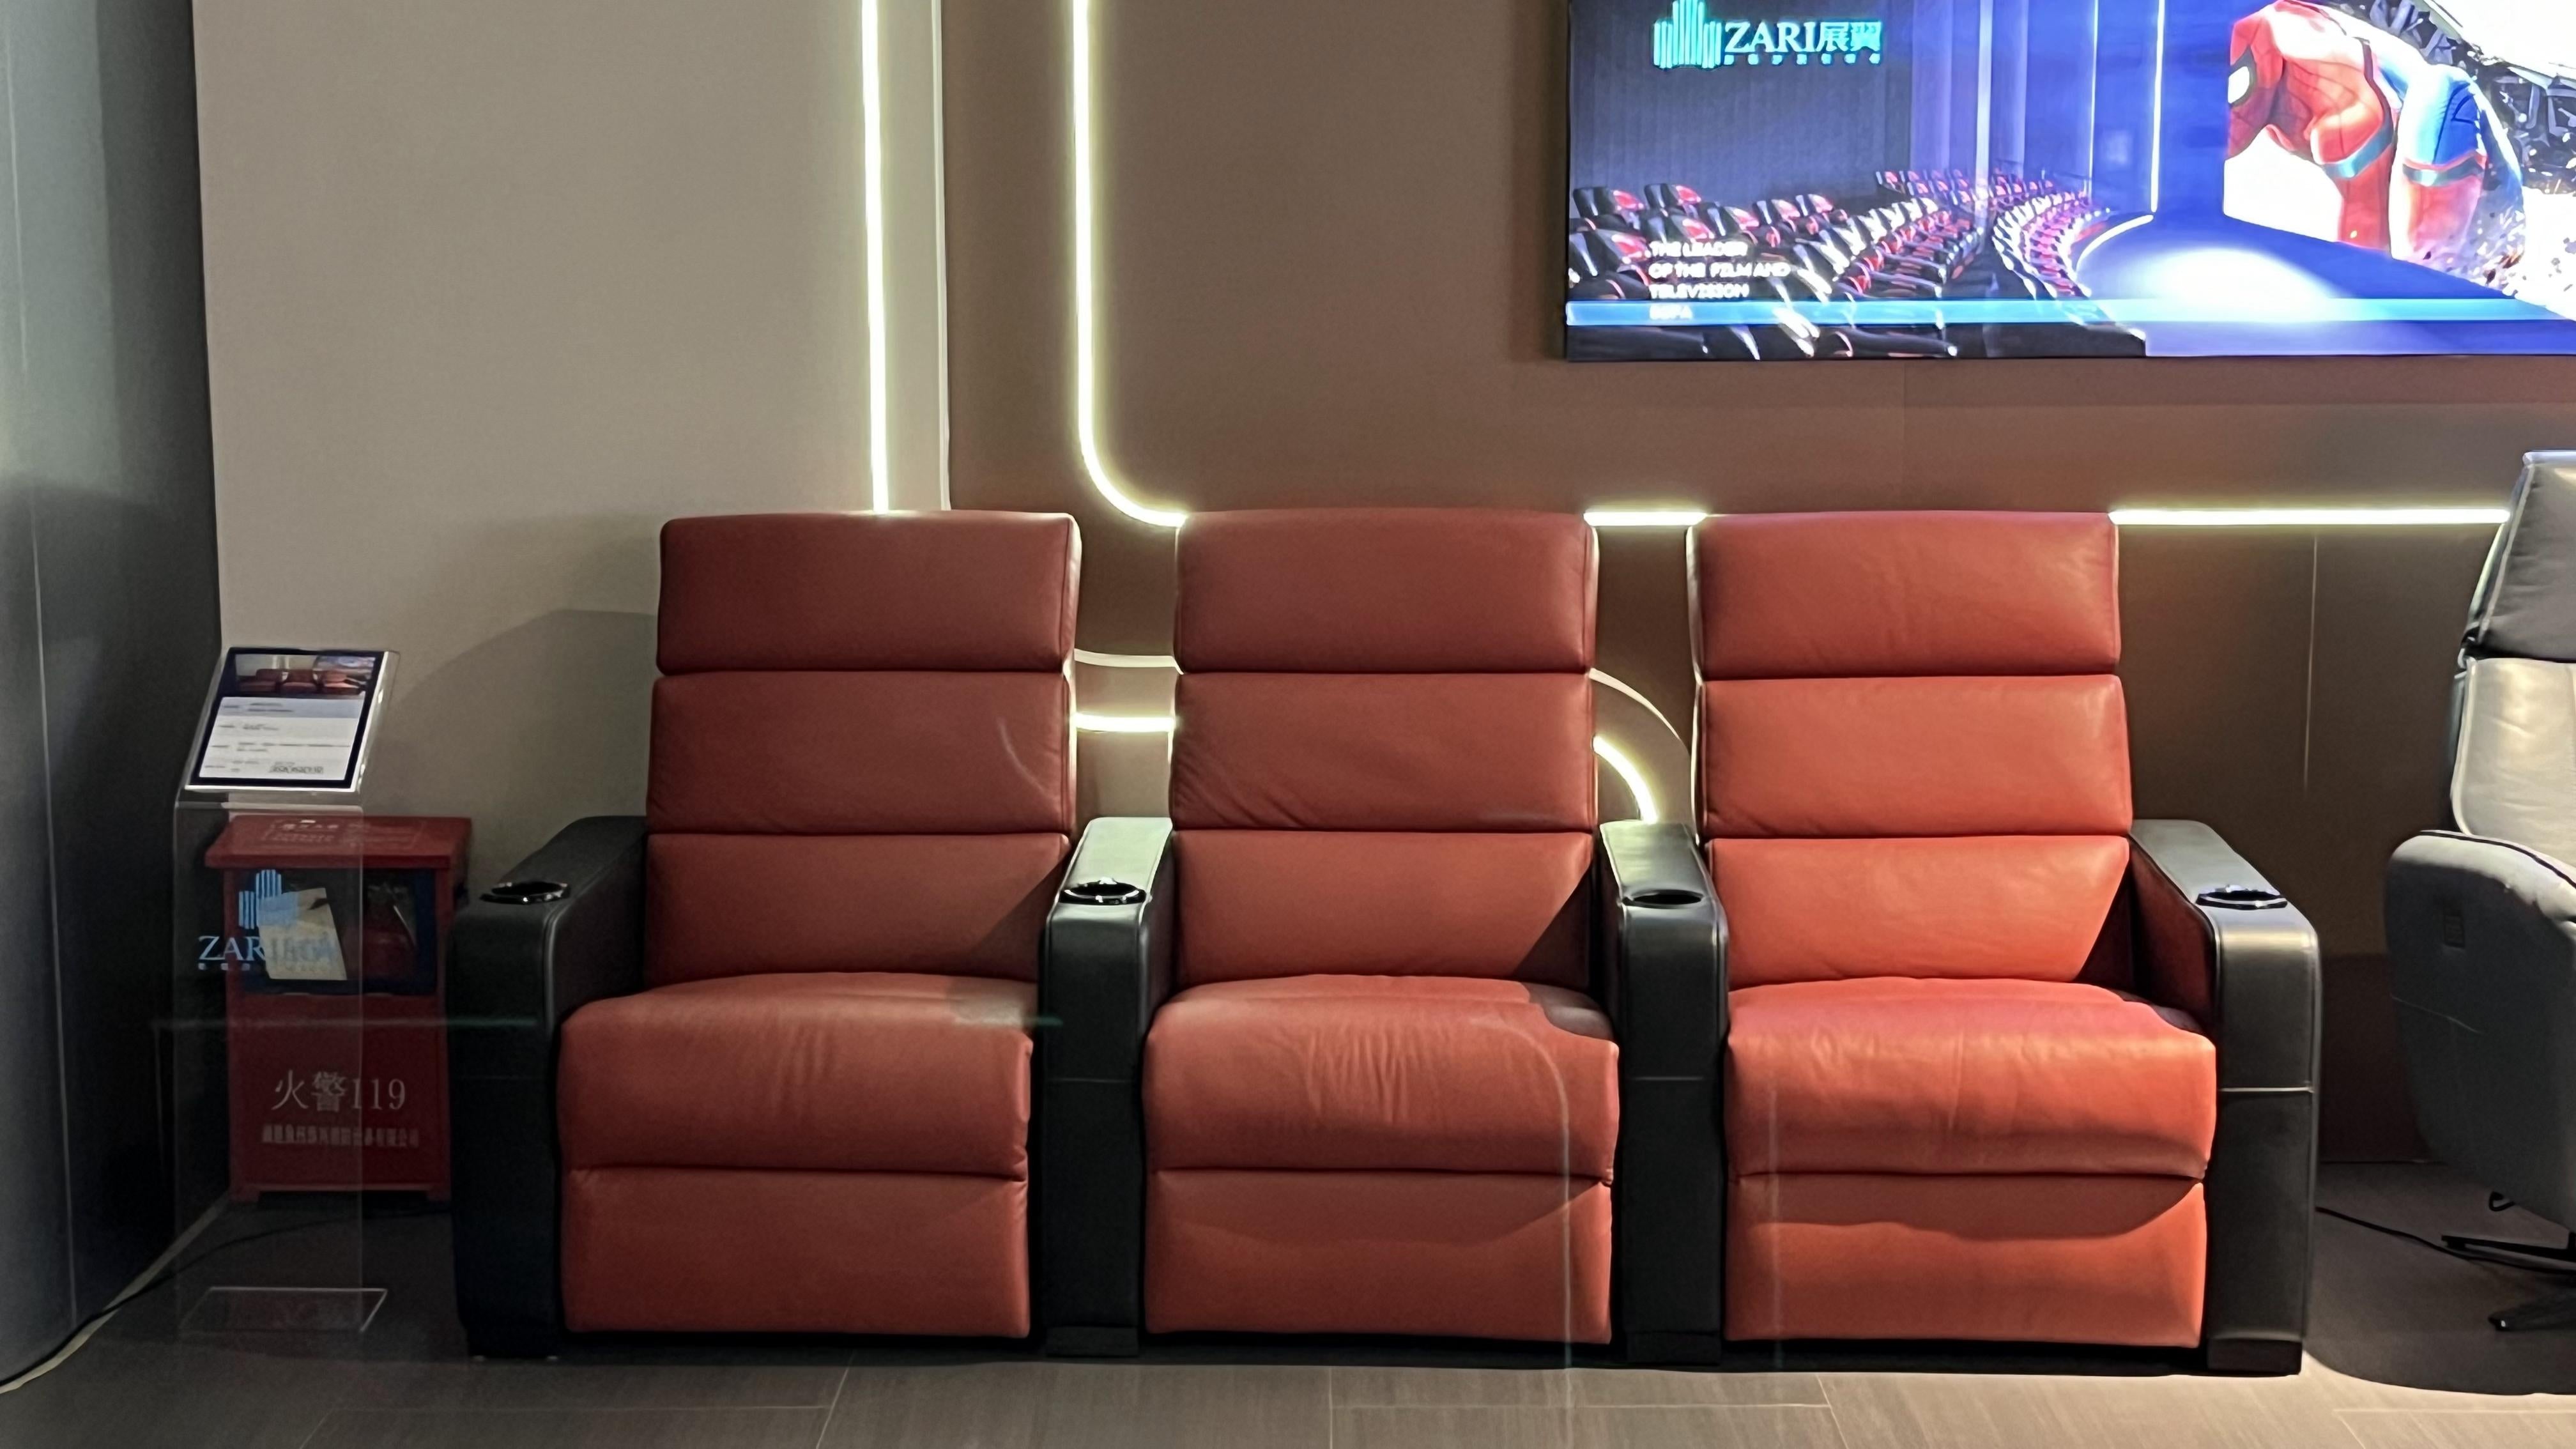 Wall Layout Optimization: Maximizing Space by Placing Sofas Against the Wall in Your Home Theater